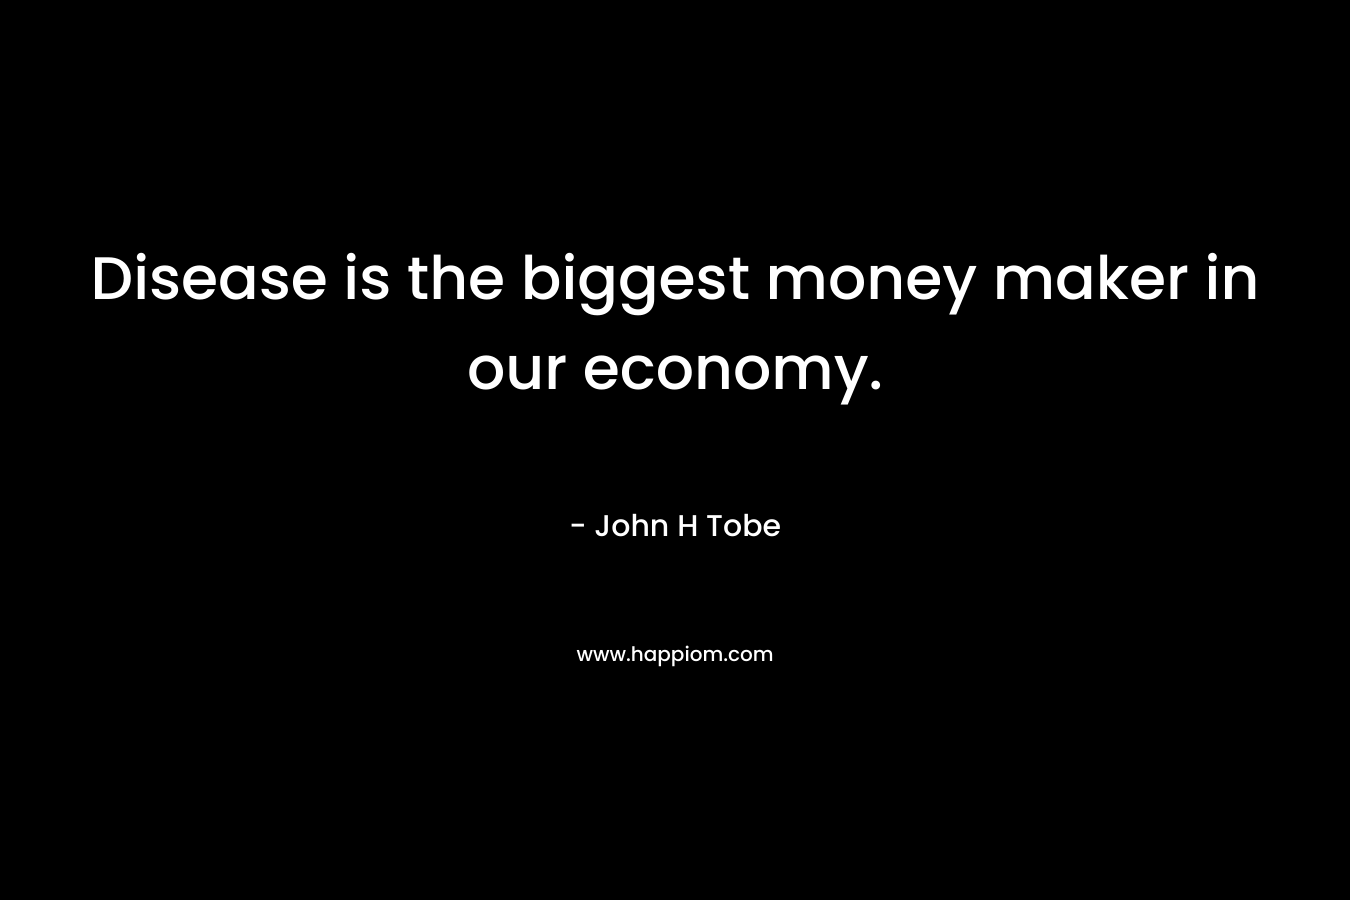 Disease is the biggest money maker in our economy. – John H Tobe